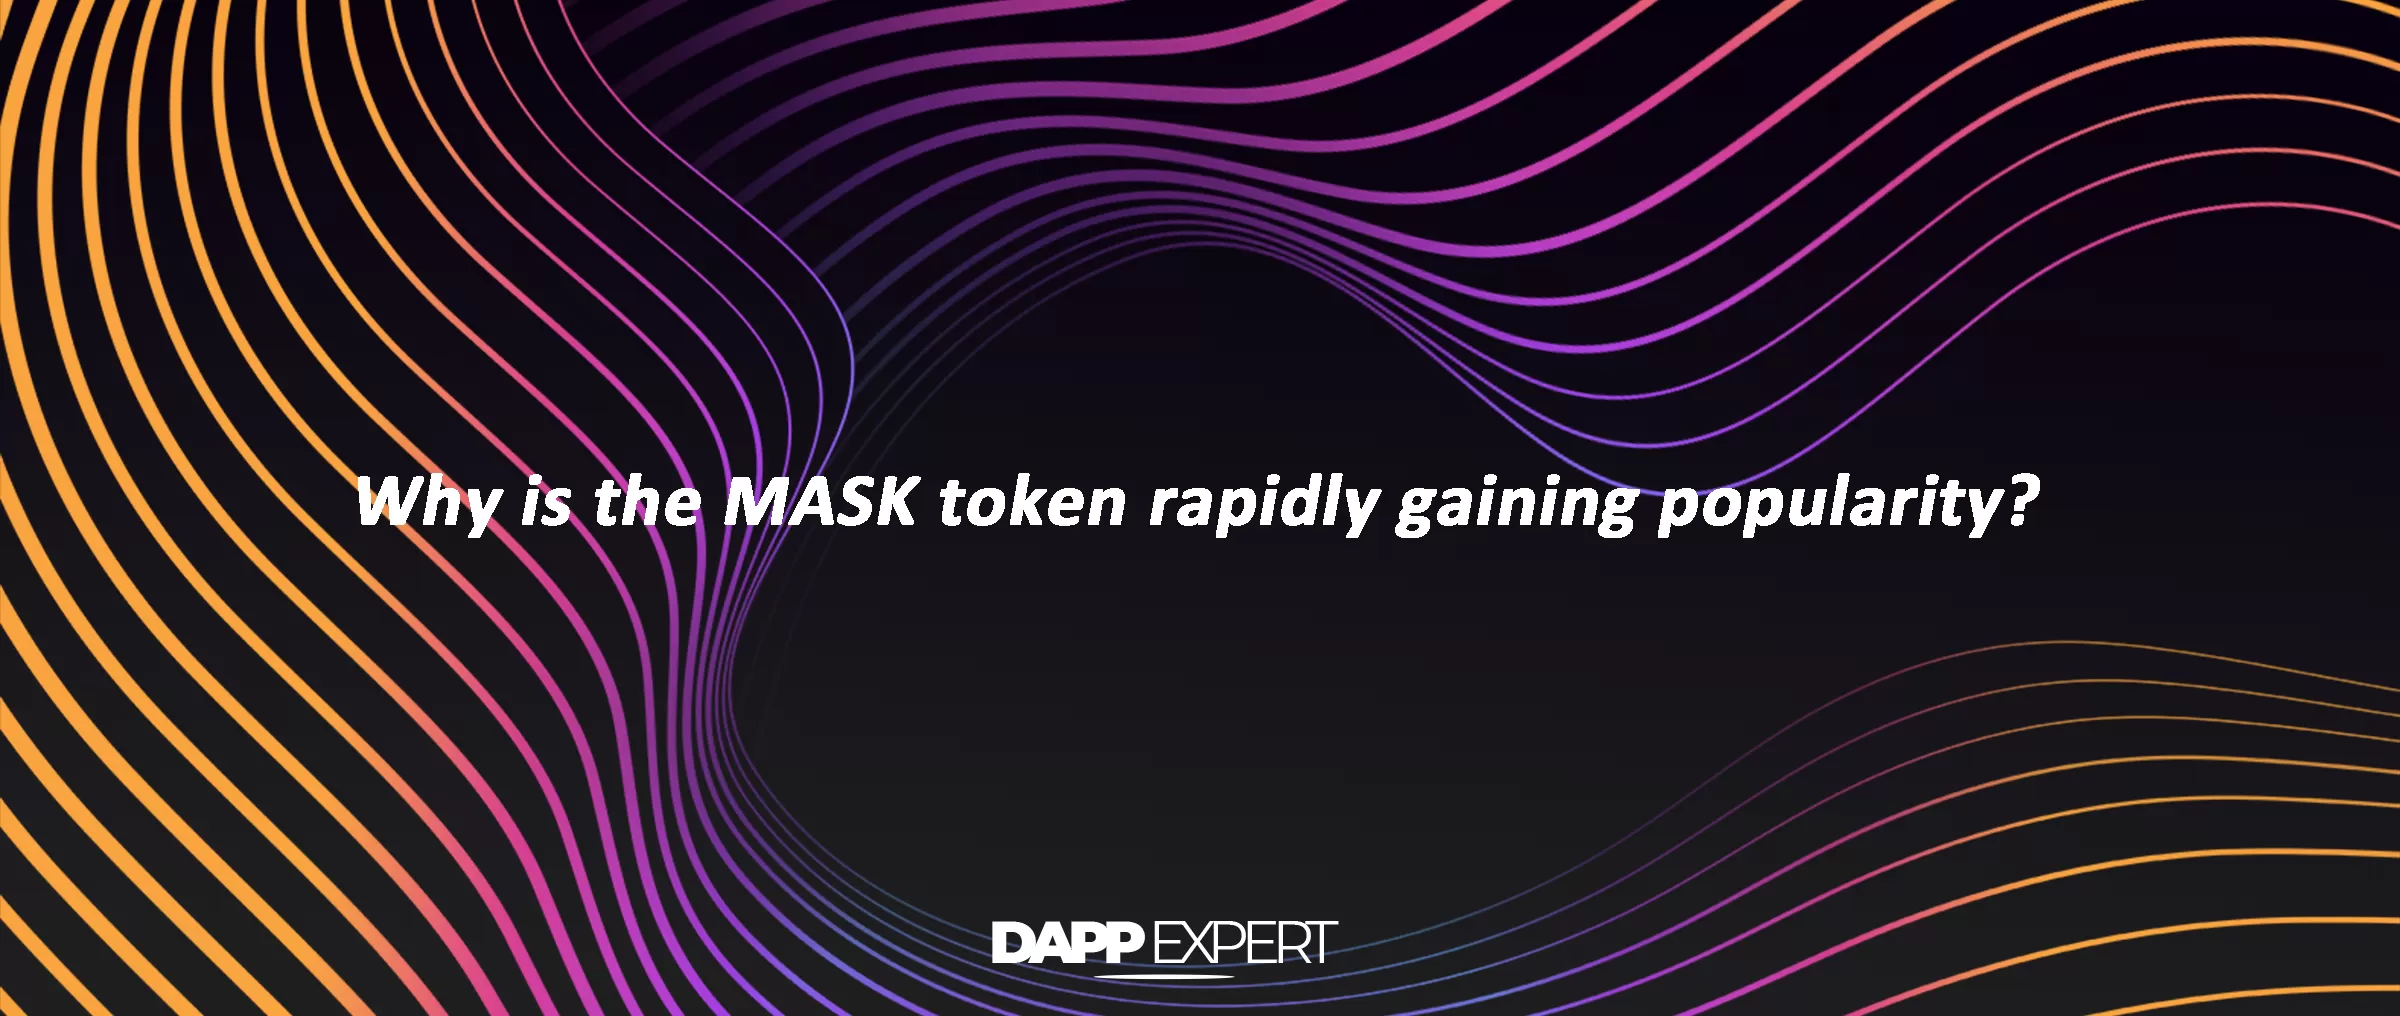 Why is the MASK token rapidly gaining popularity?